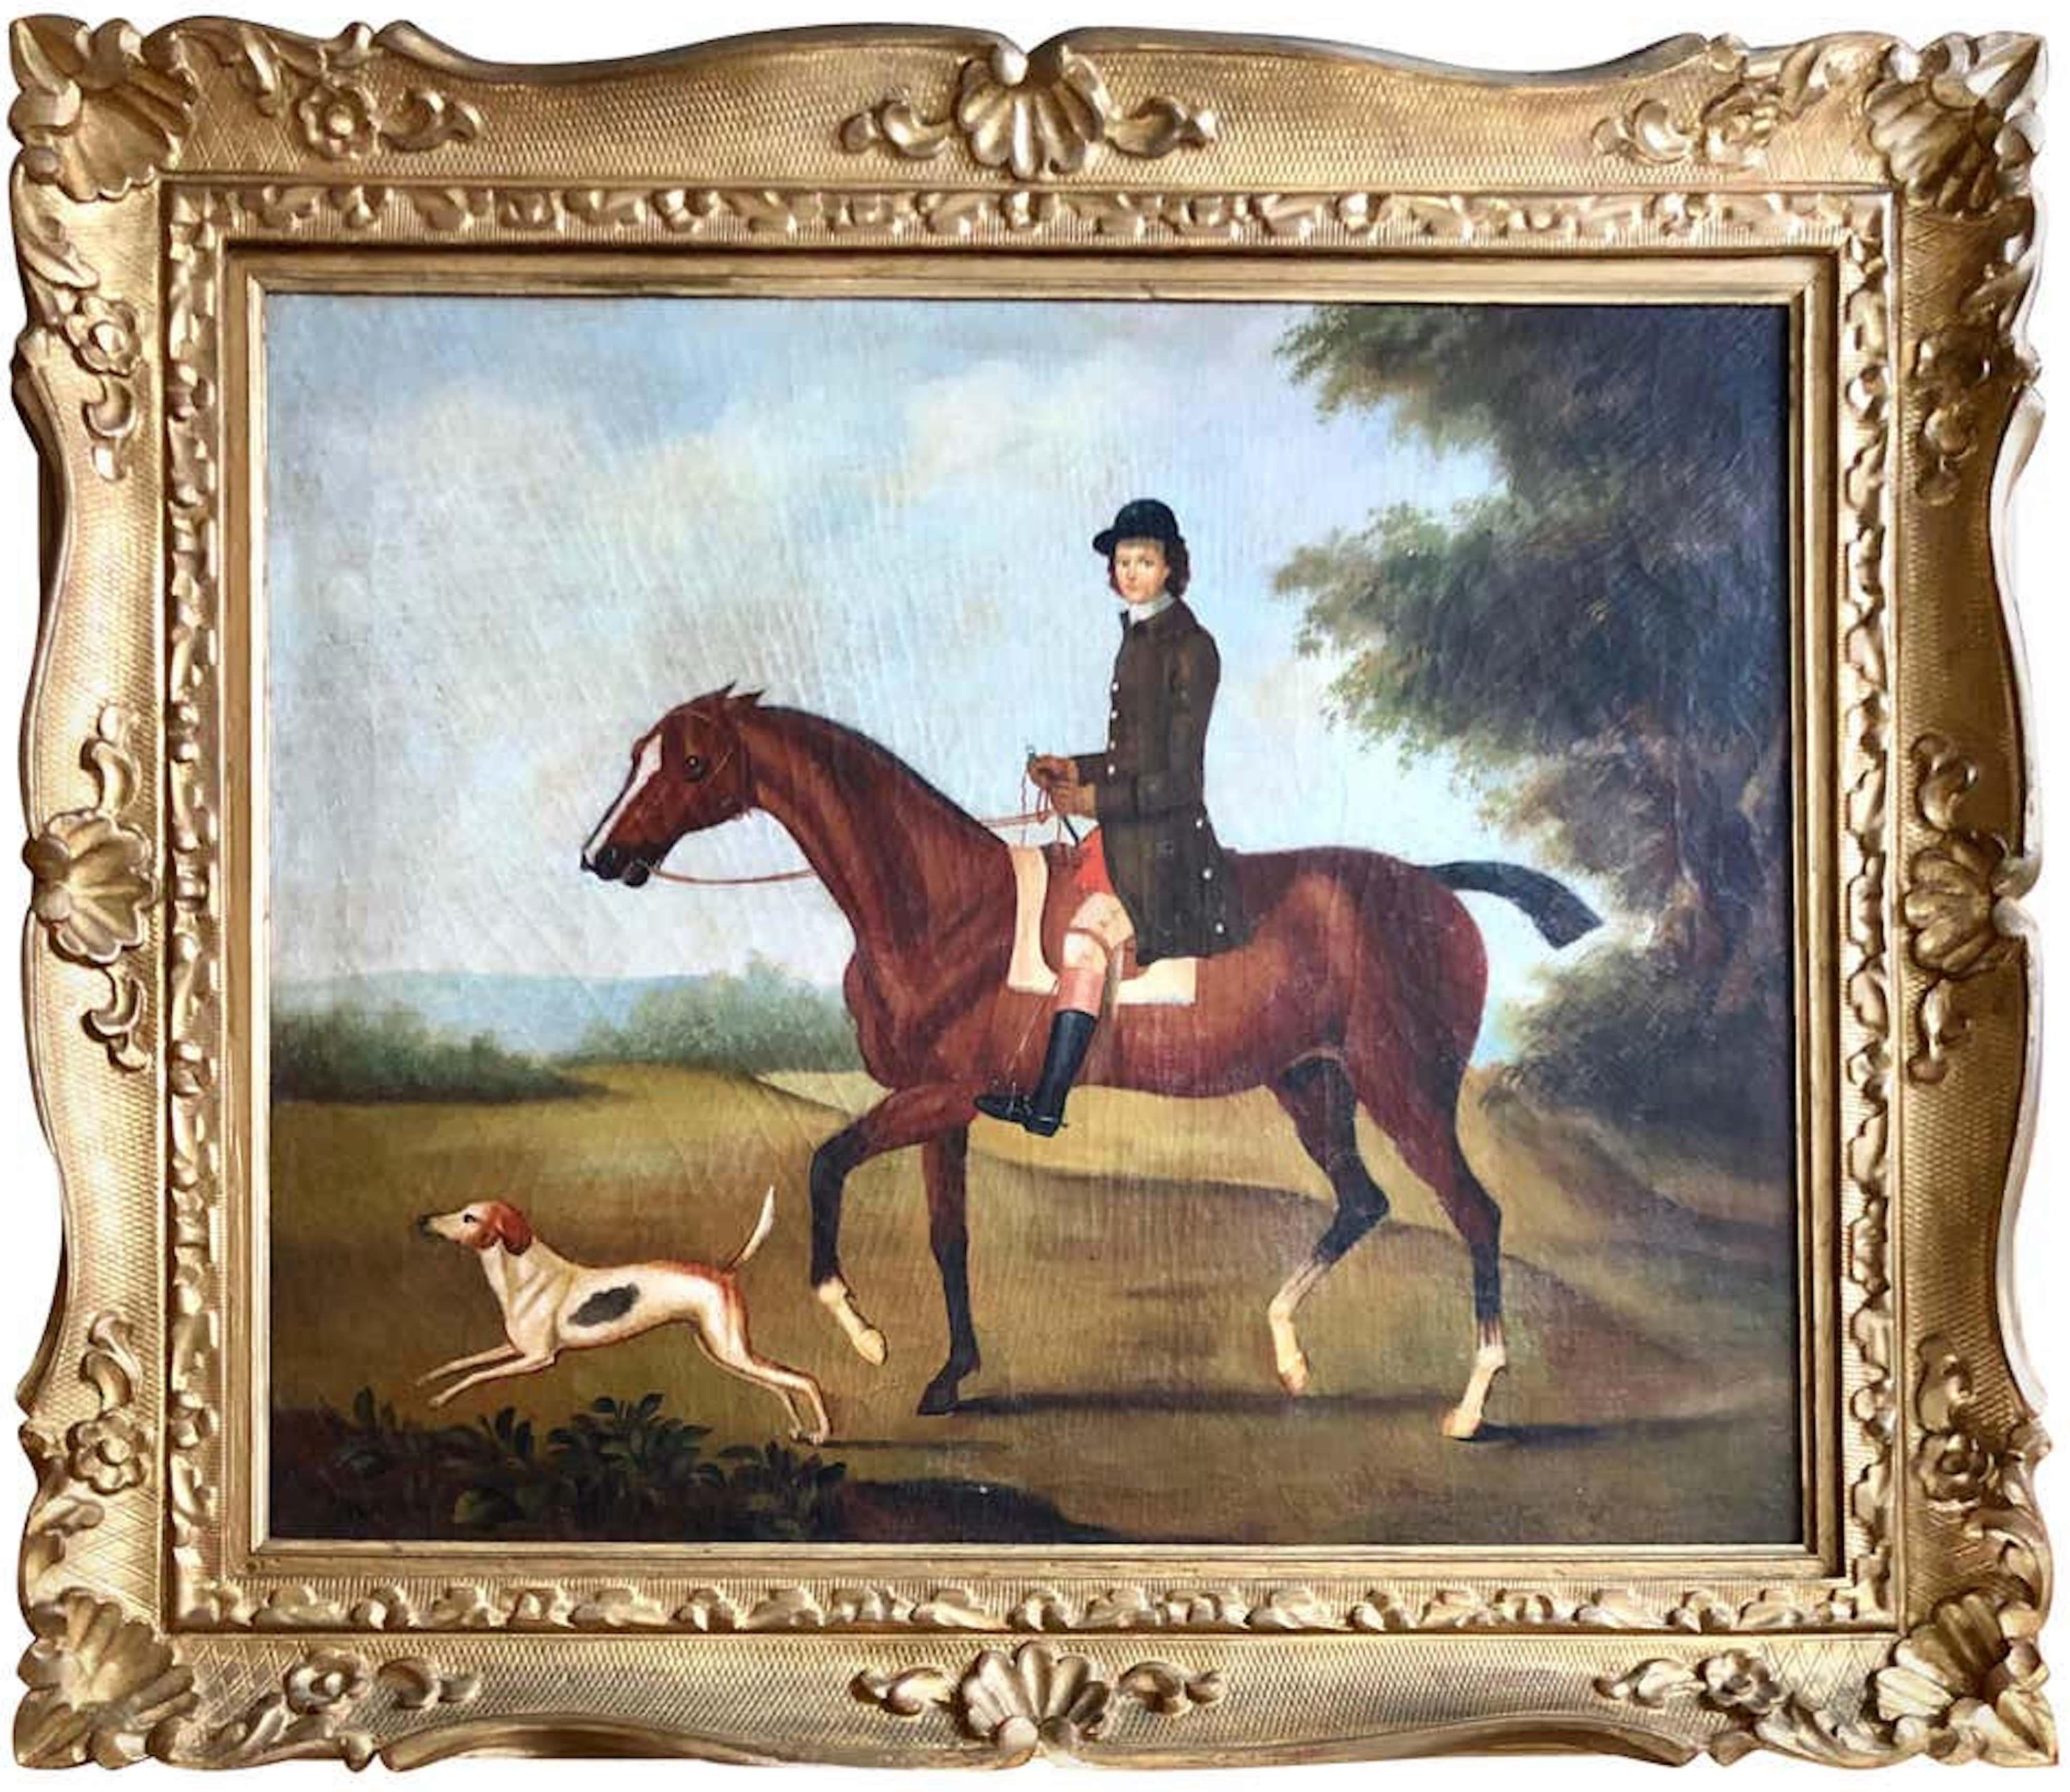 Unknown Landscape Painting - Rider and Hound in the Countryside